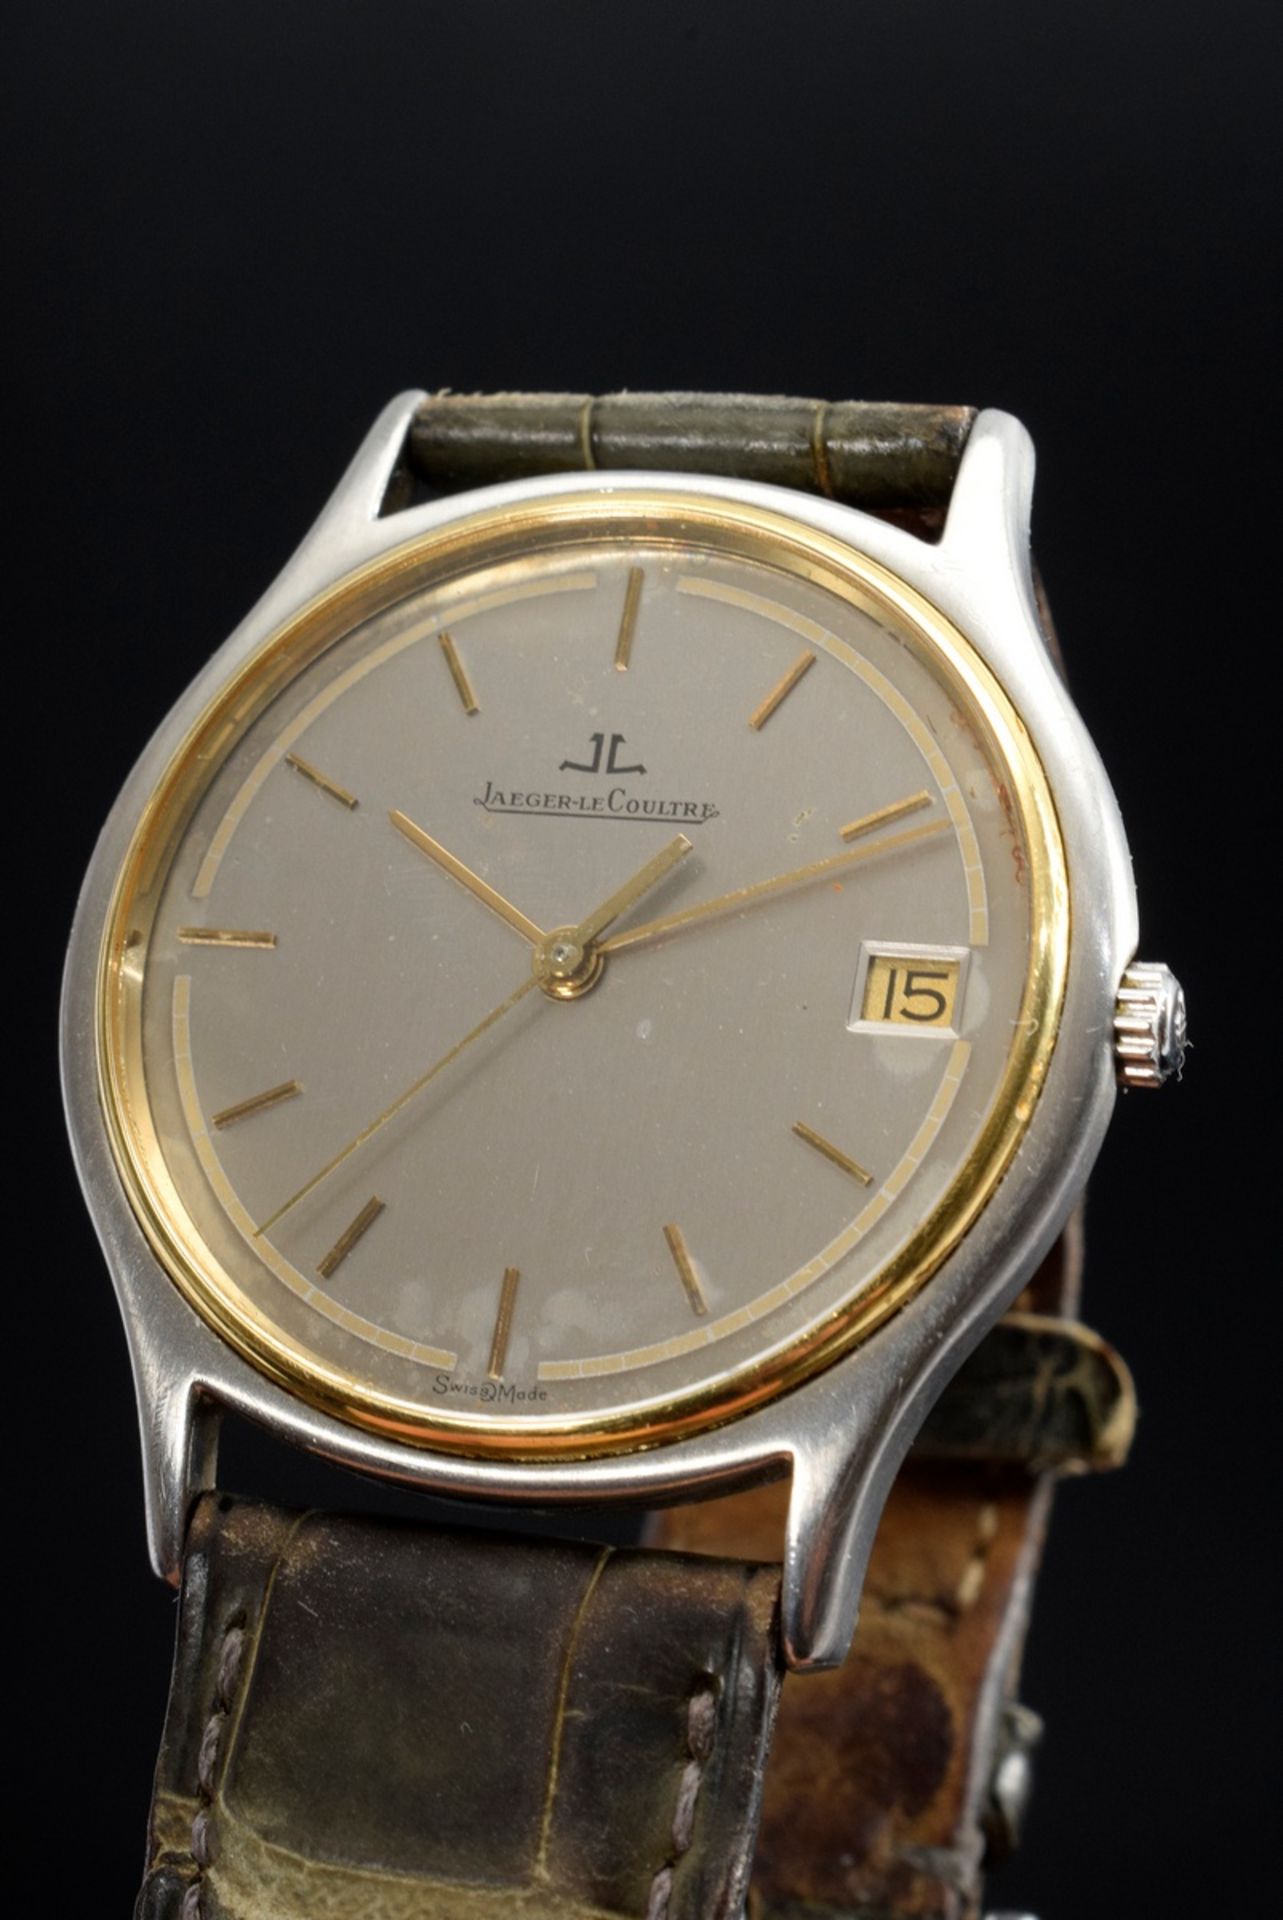 Jaeger-LeCoultre steel men's wristwatch, quartz movement, large seconds, date, hour and minute indi - Image 4 of 4